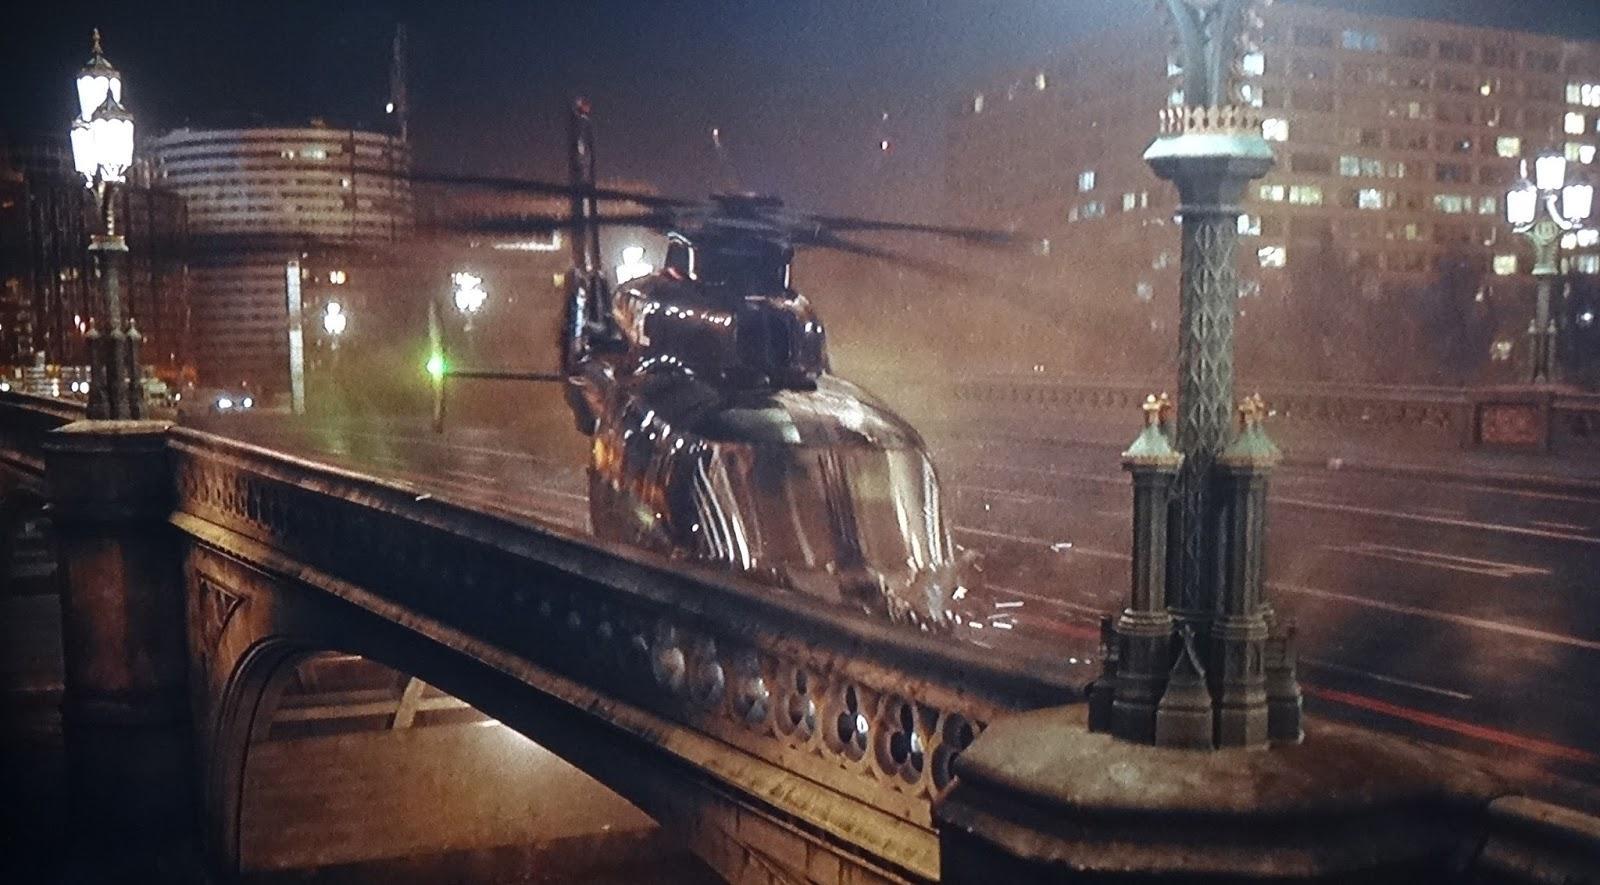 Helicopter crash in "Spectre"